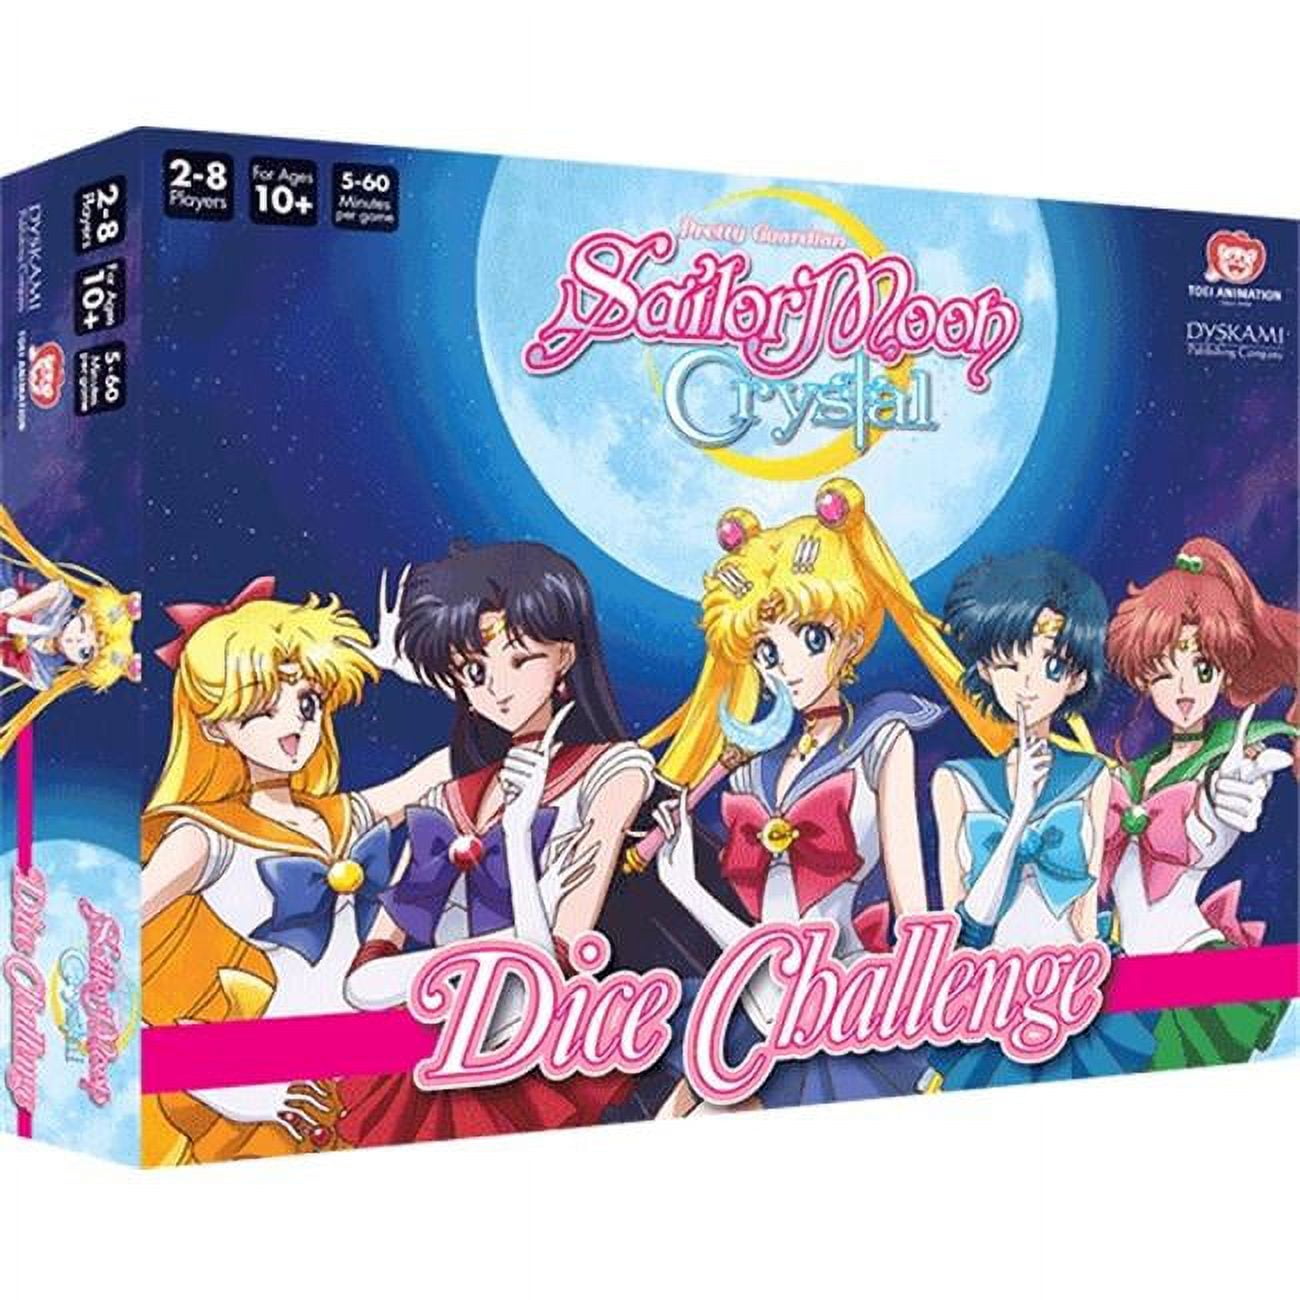 Dys401 Sailor Moon Crystal Dice Challenge Game